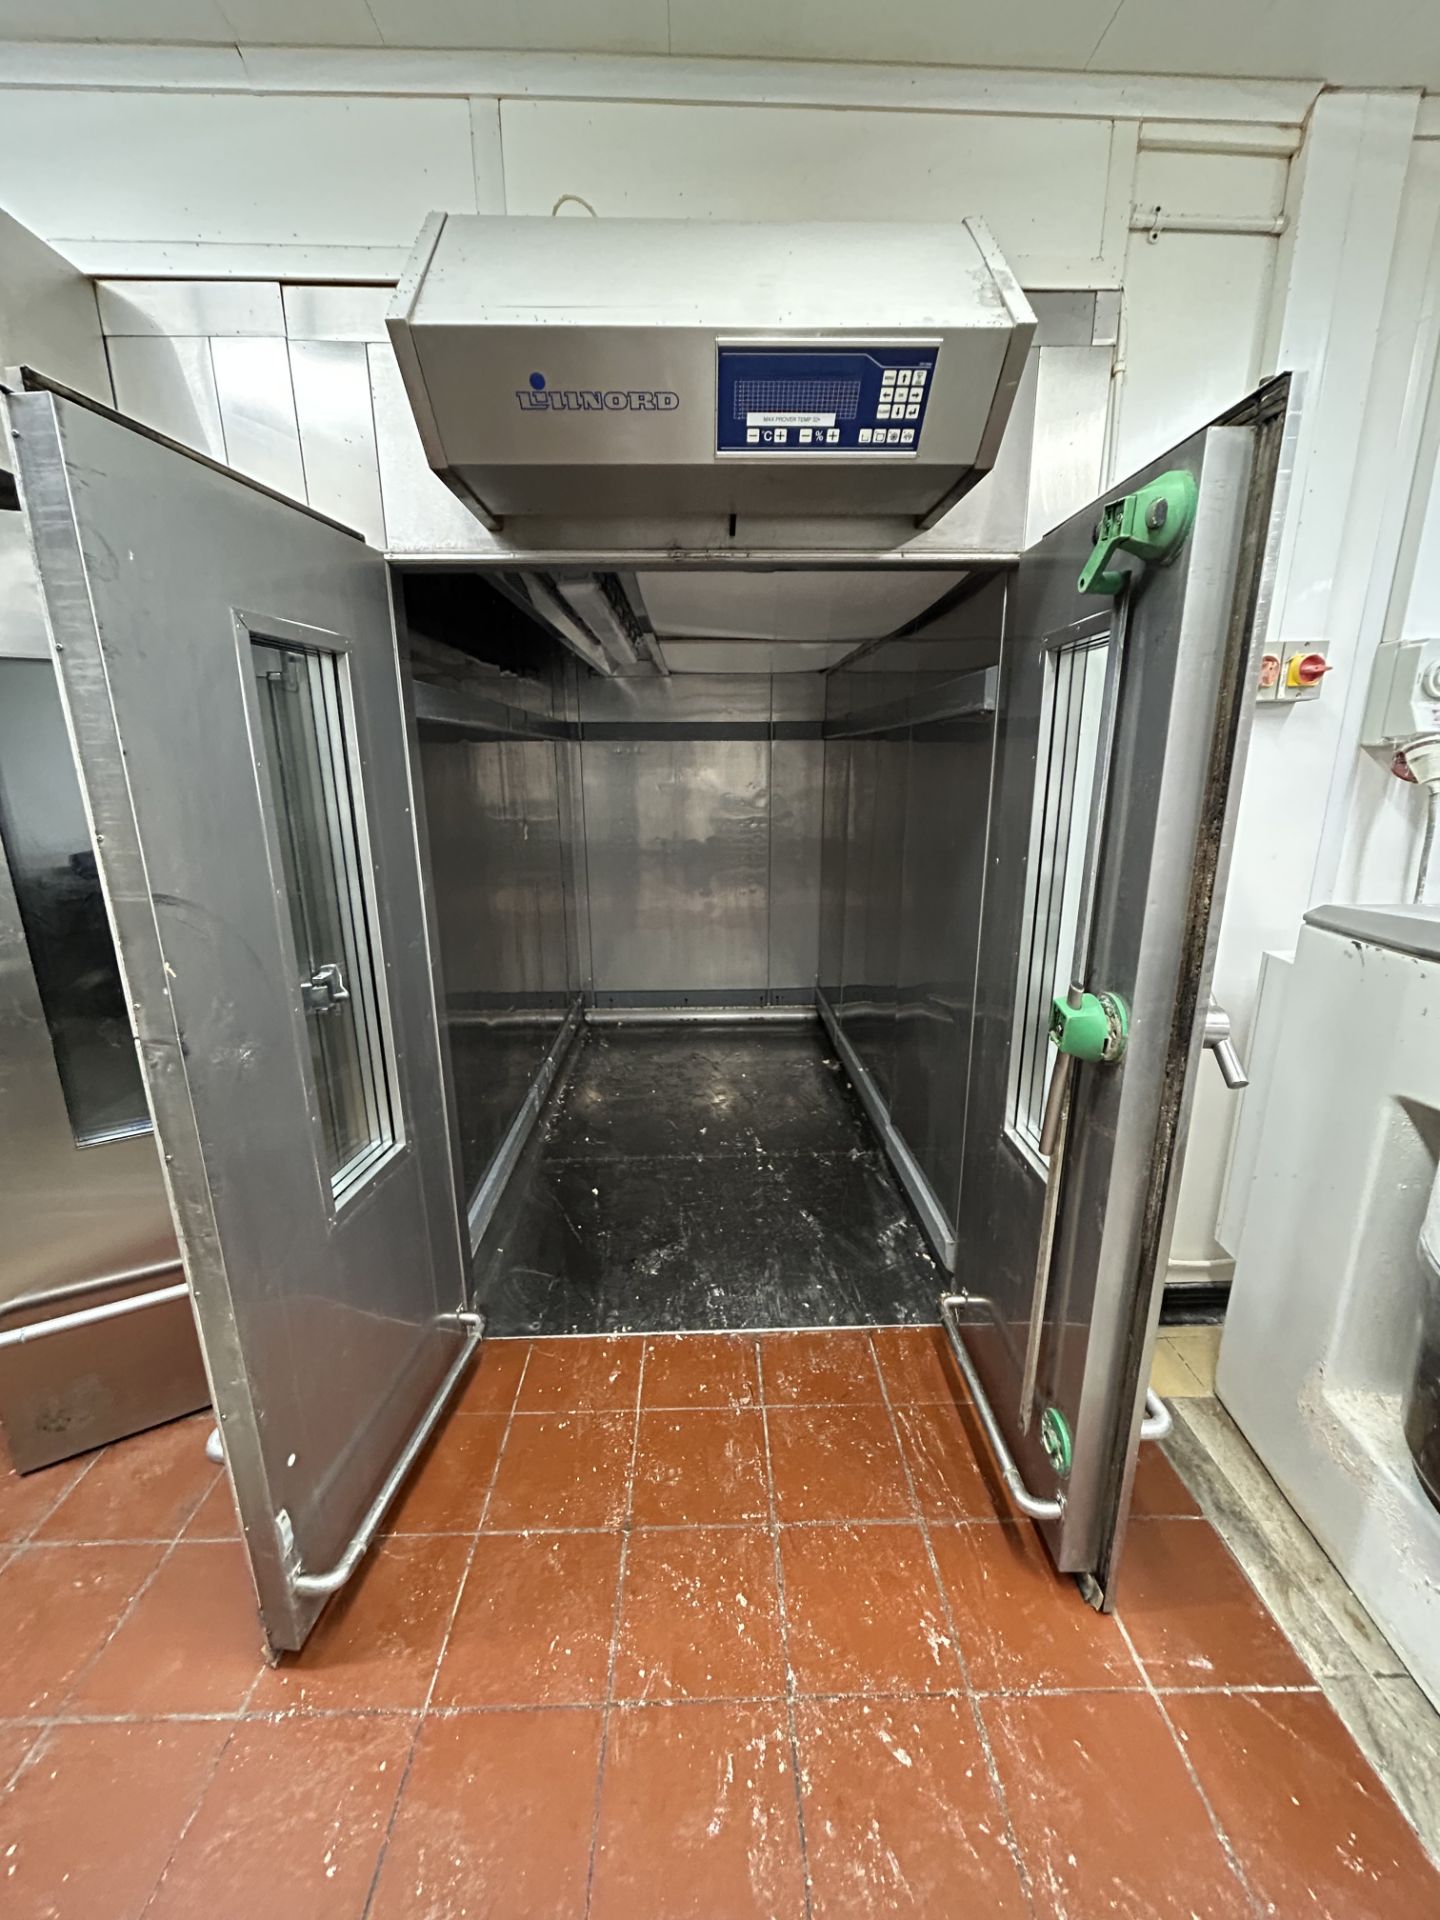 Lillnord GPC 2000 2 Door Automatic Proofer Oven | LOCATED IN SOUTHPORT - Image 4 of 6